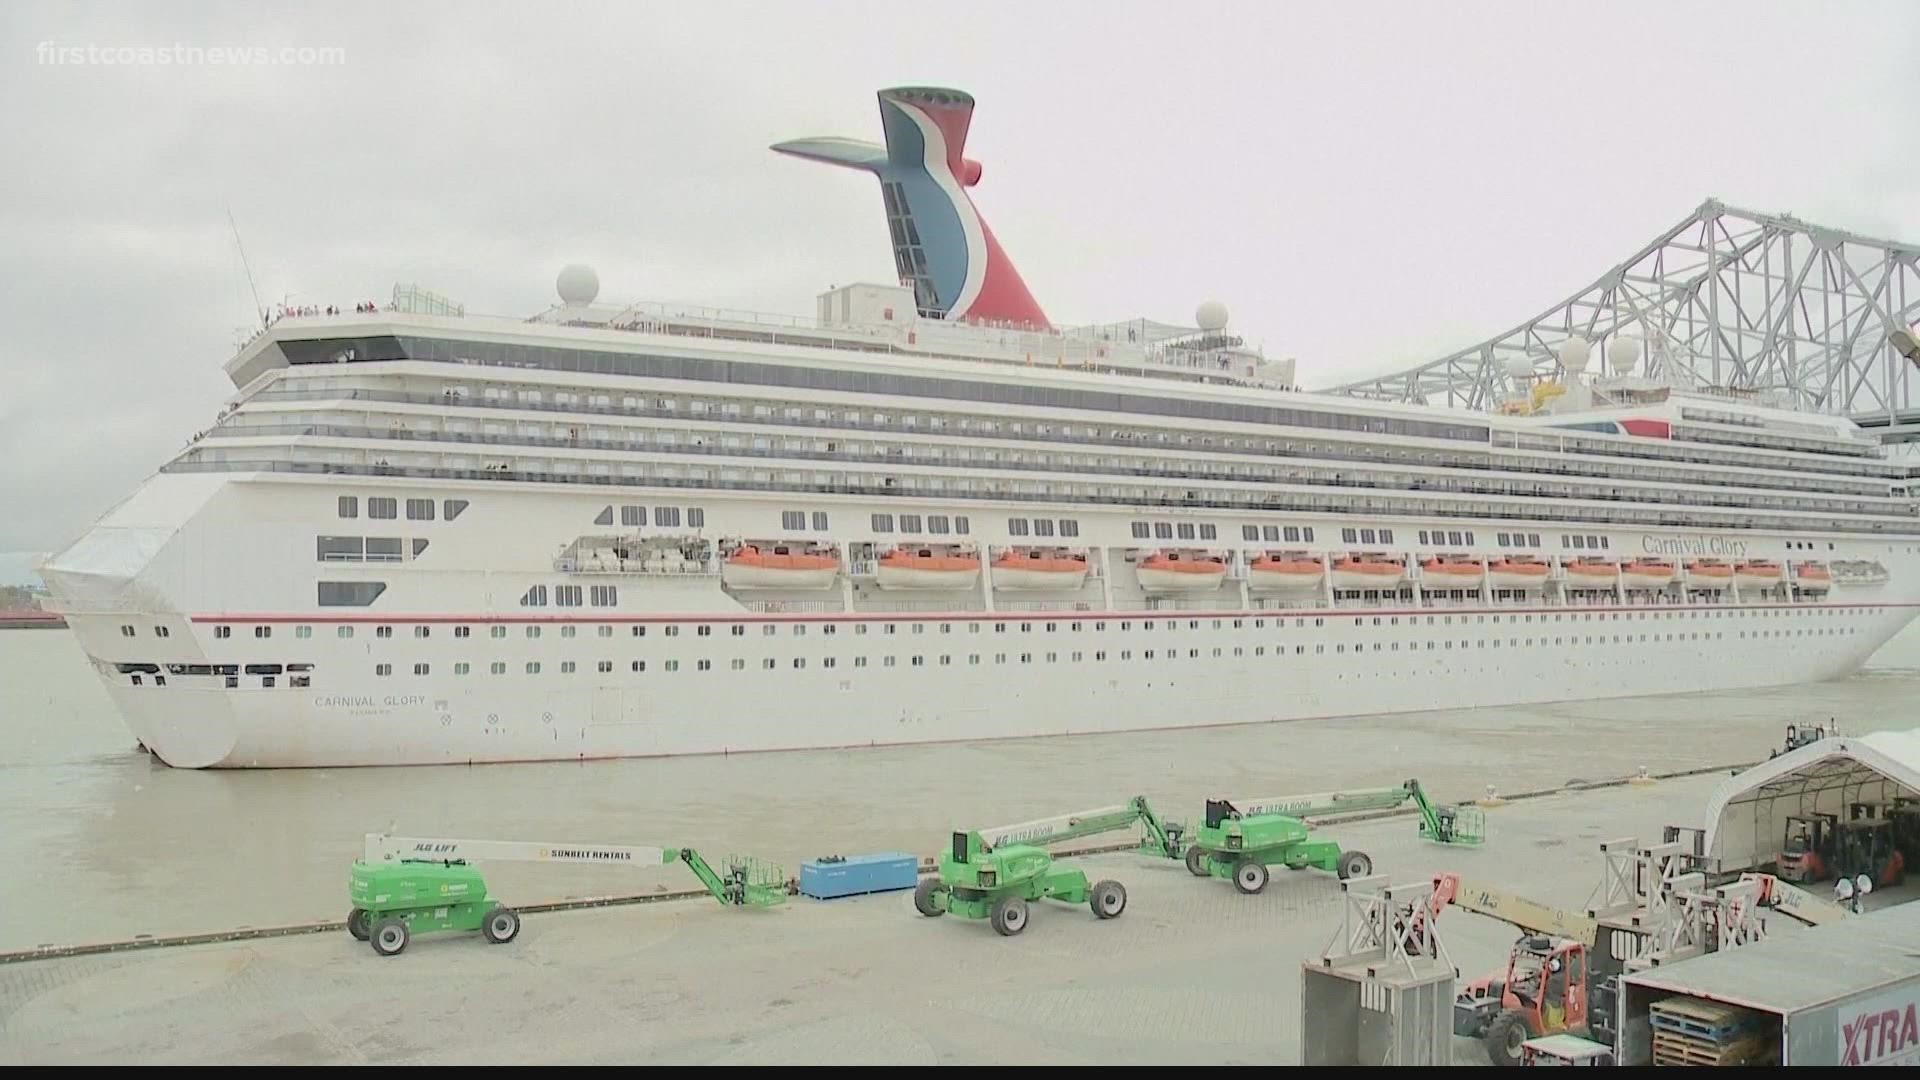 Carnival announced last week that the restart of sailing for five ships operating out of U.S. home ports will be moved to 2022.